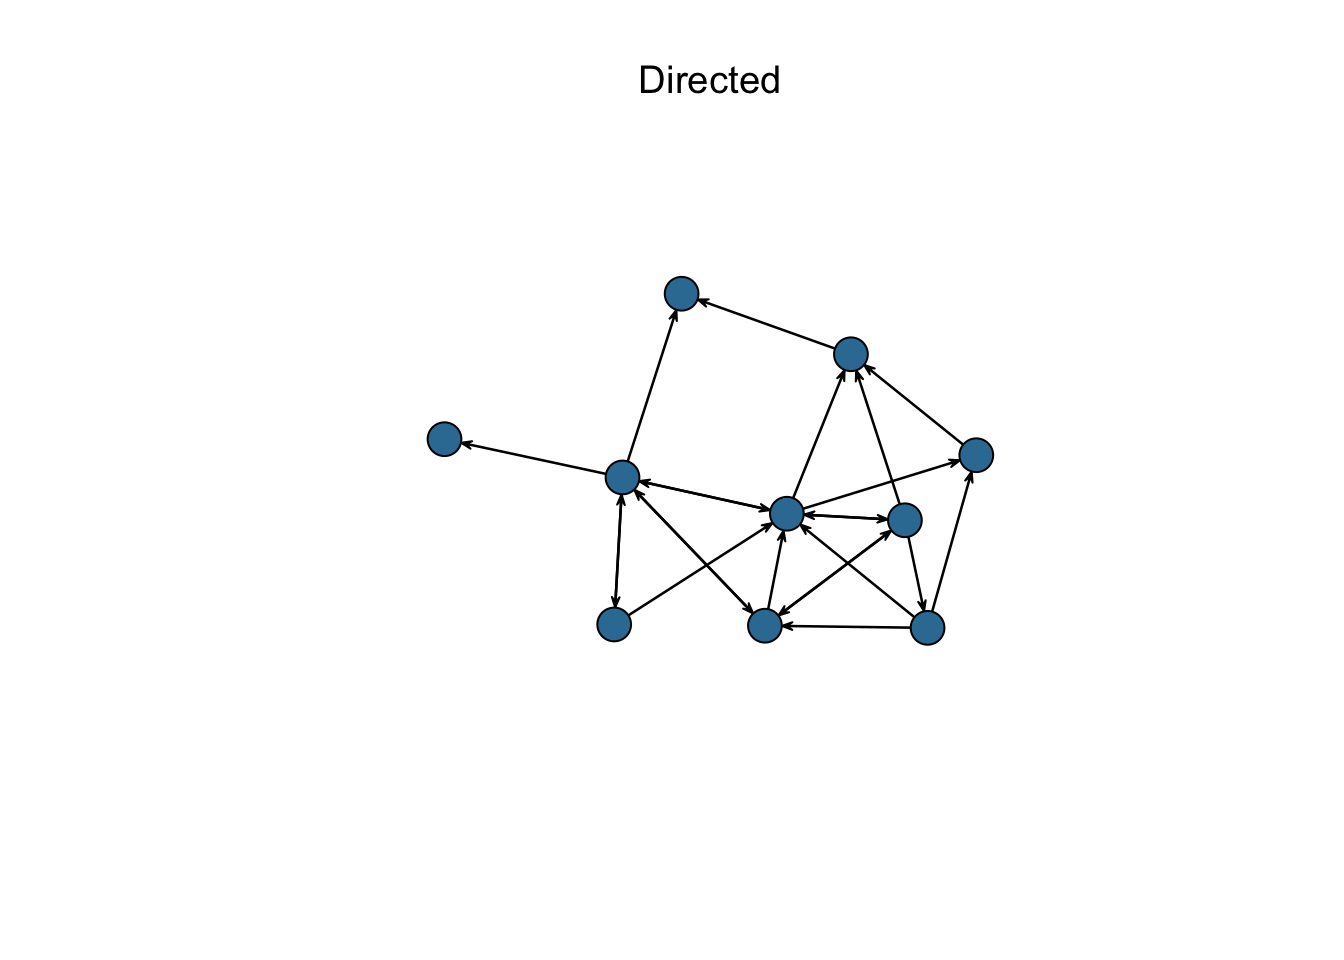 Network directionality